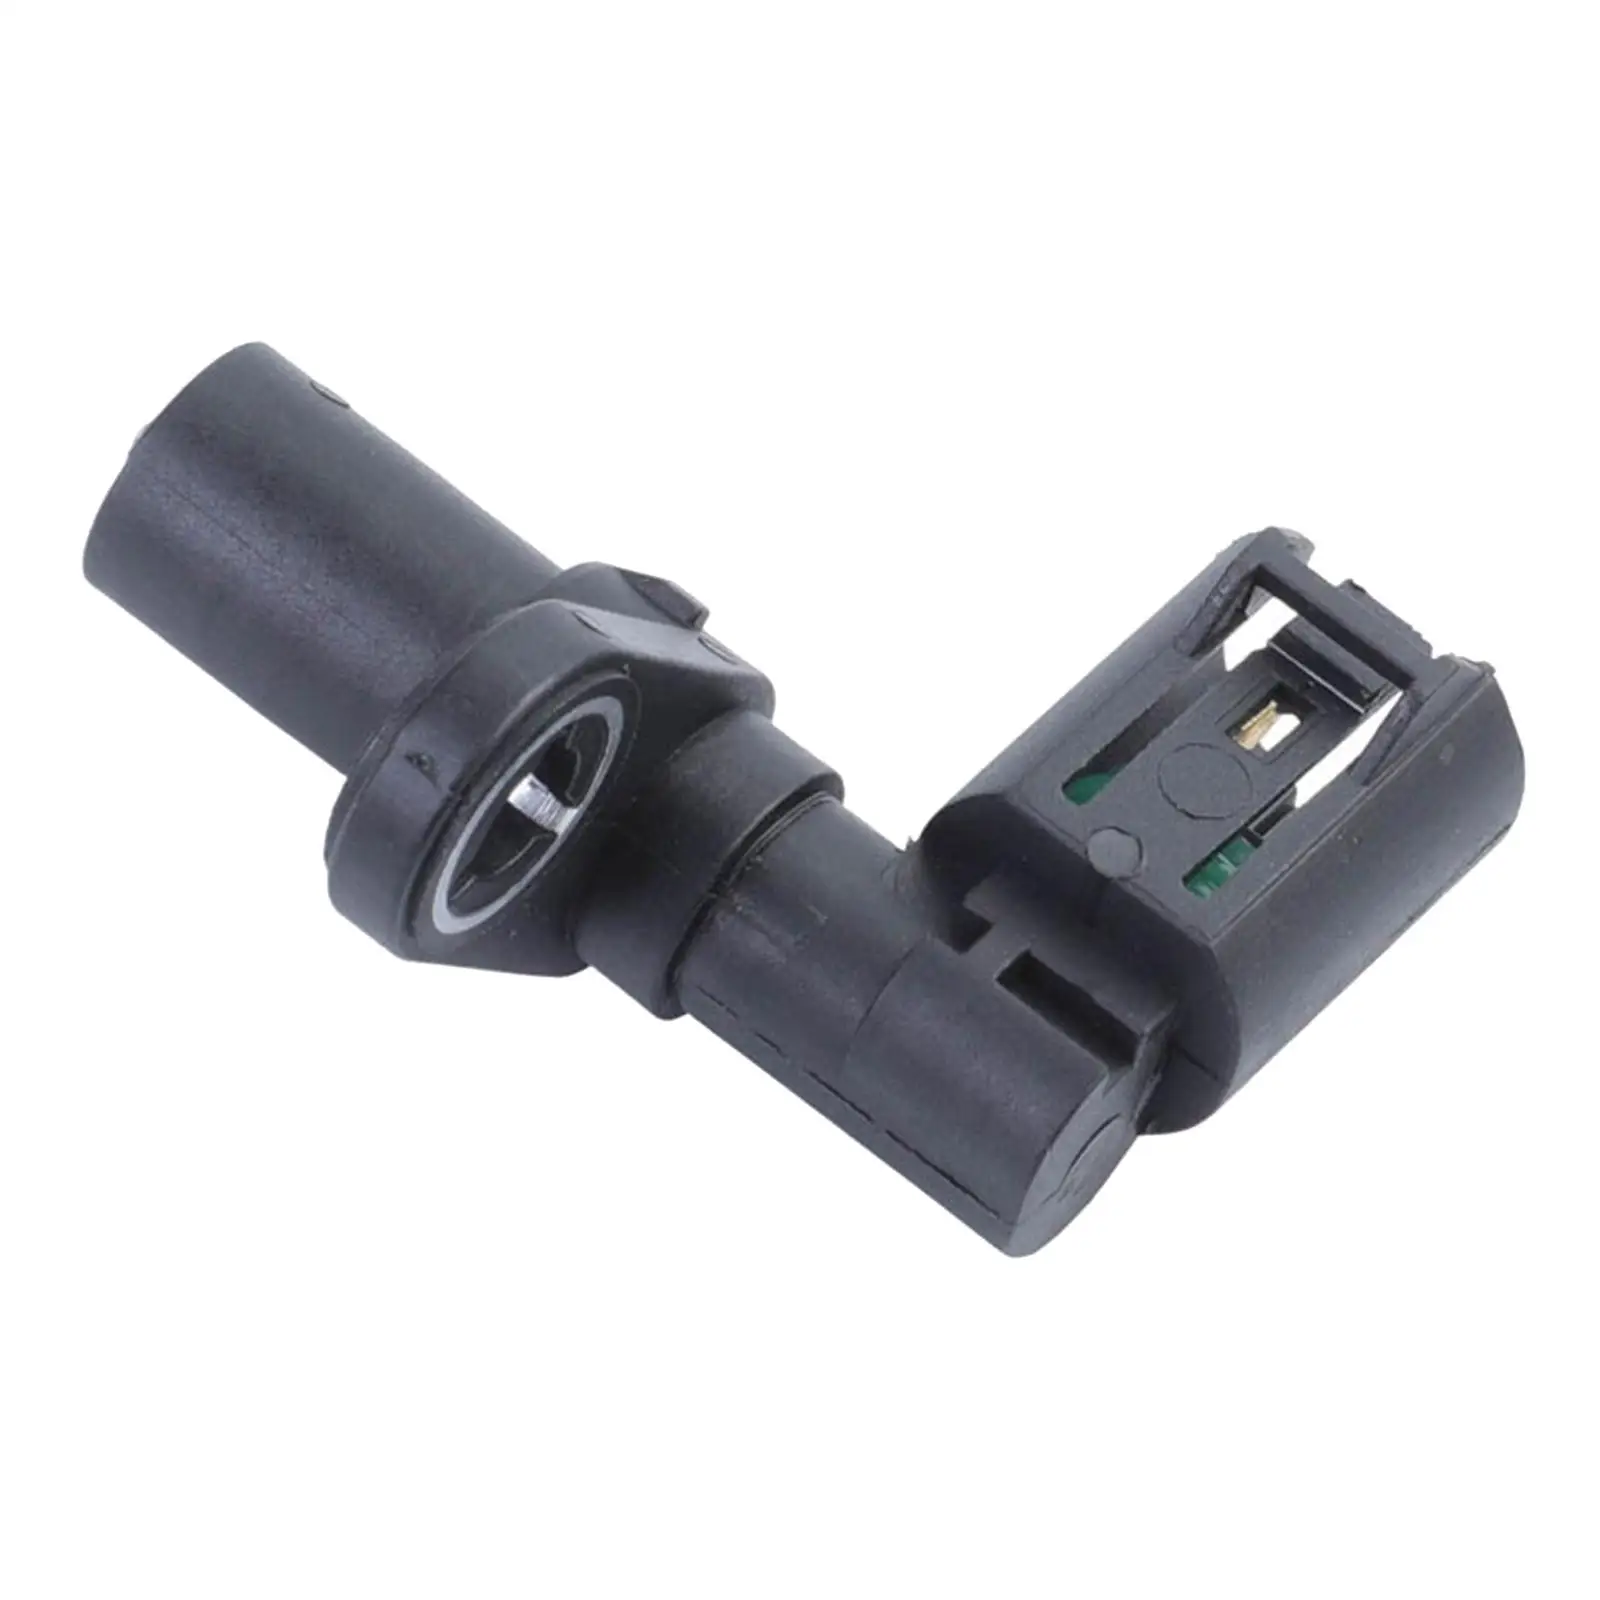 Crankshaft Position Sensor Glossy Appearance Convenient Installation Auto Parts Replaces for Renault Kangoo 2002 to 2007